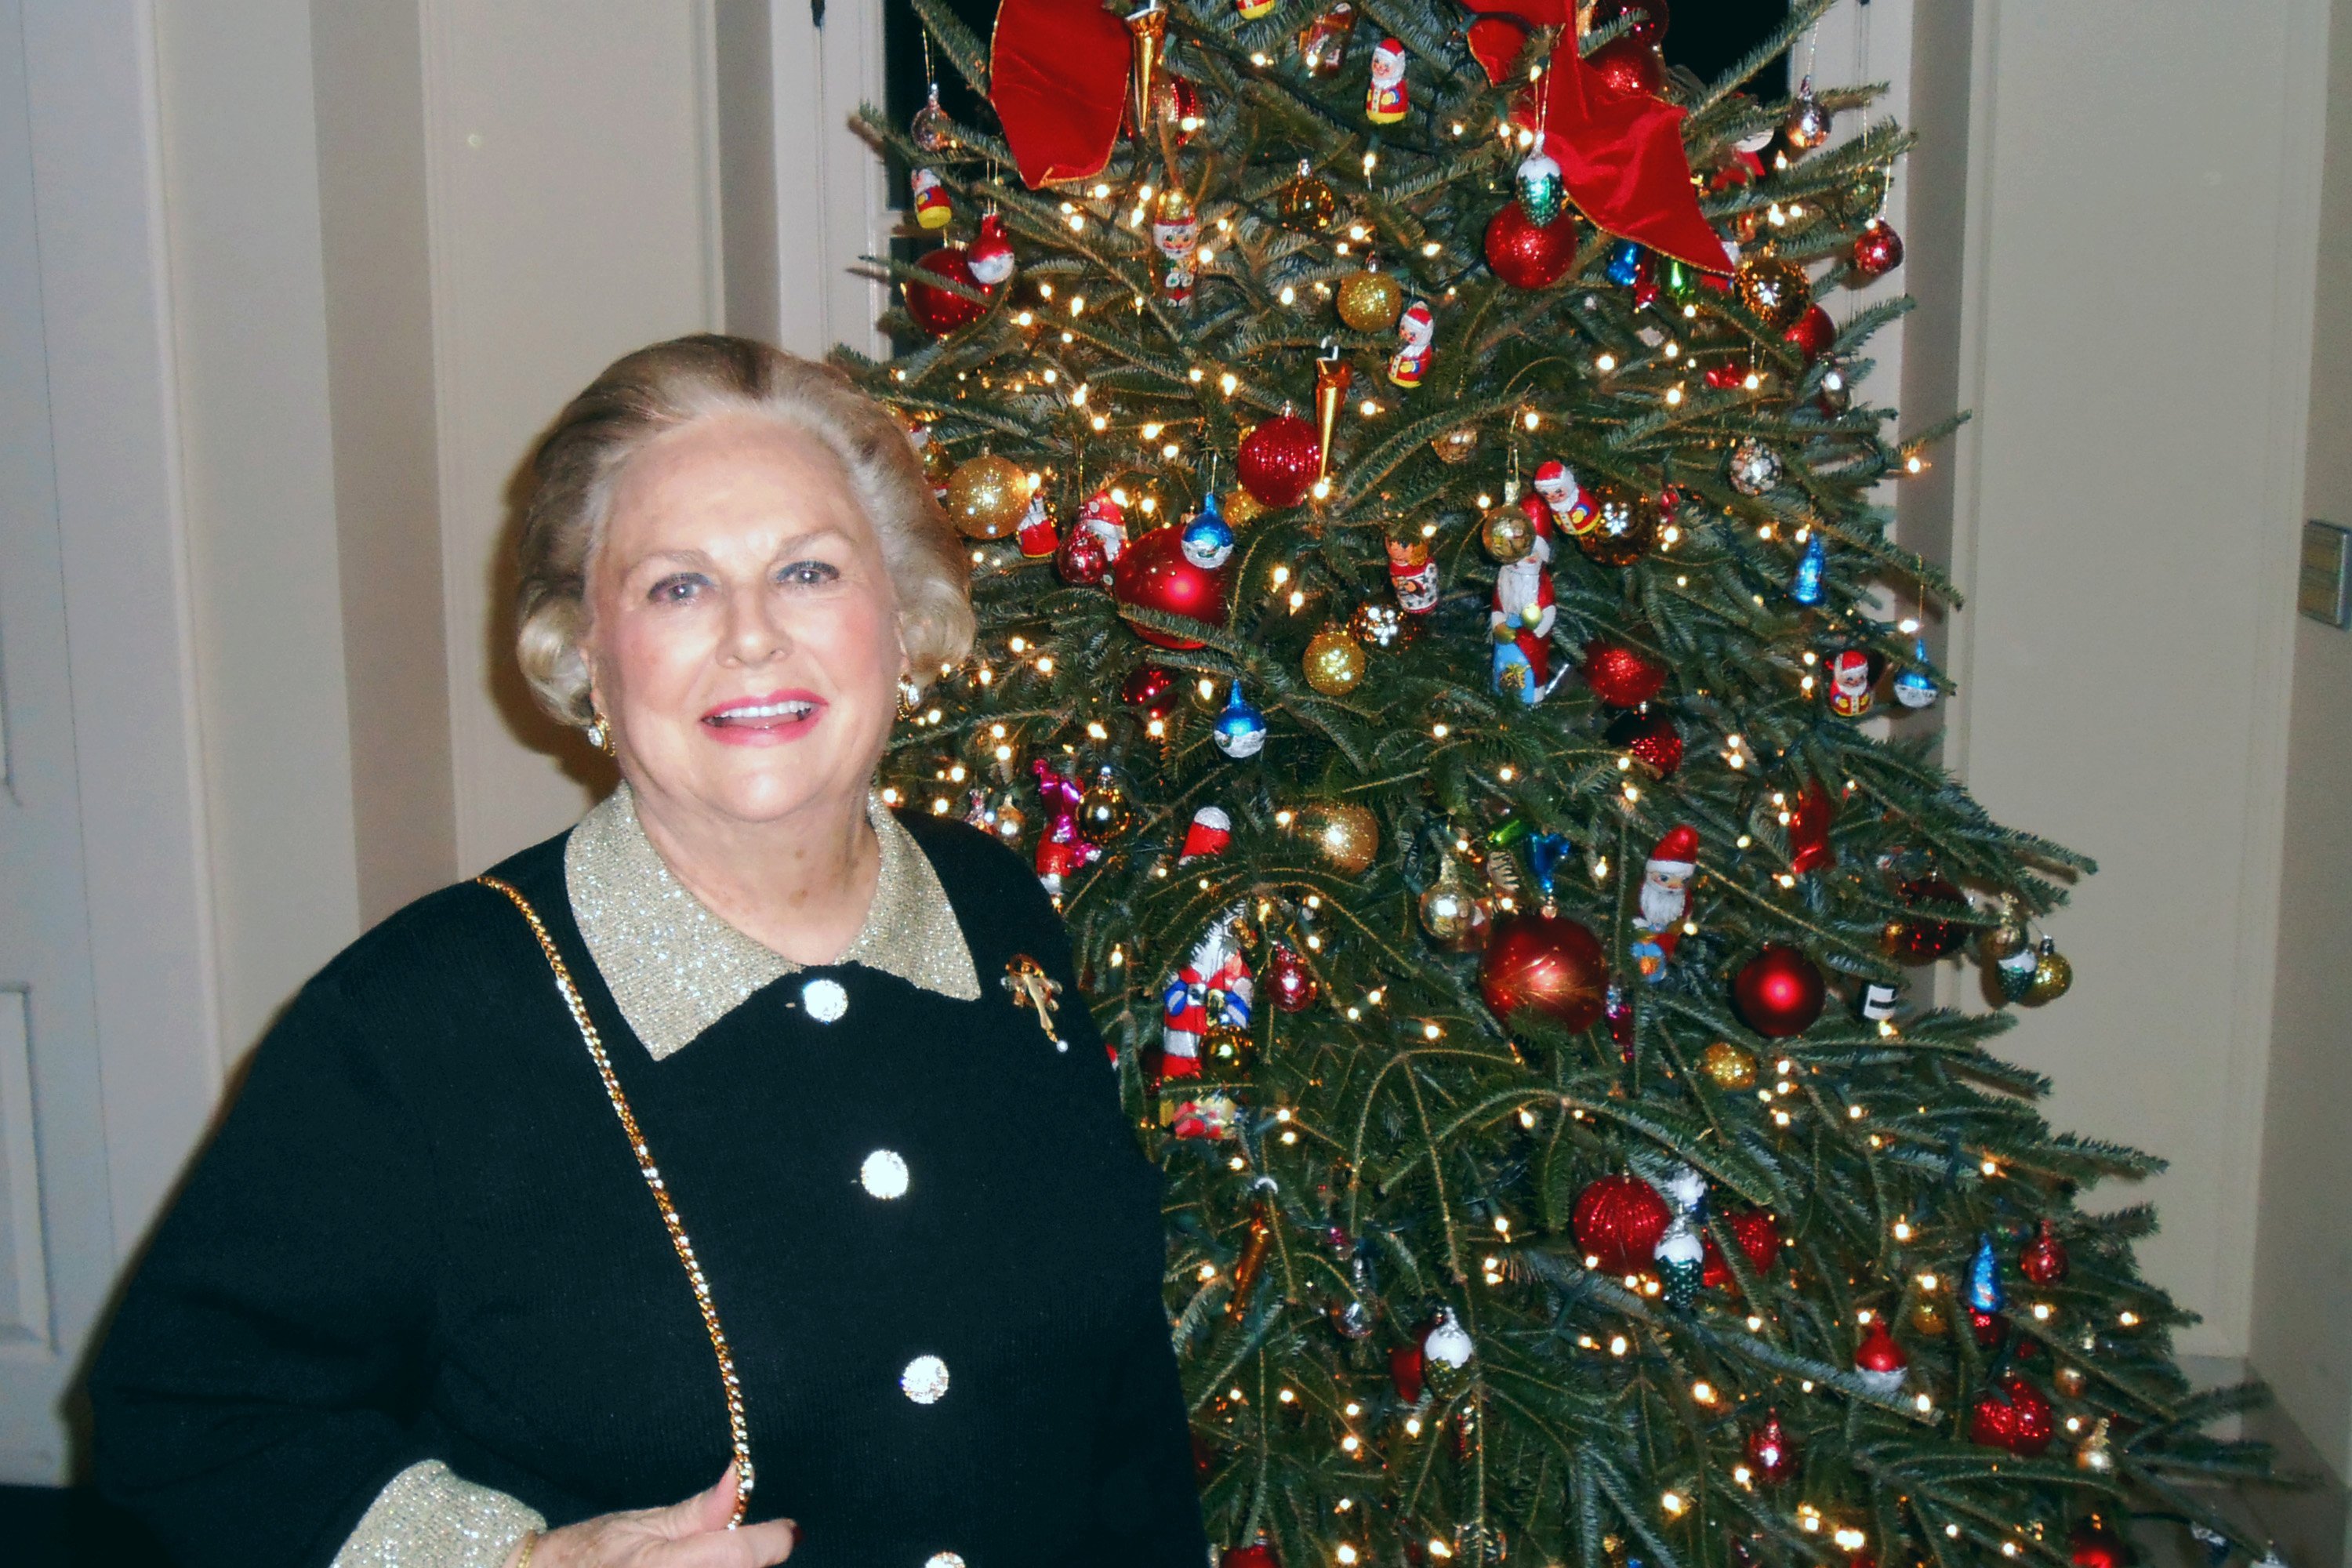 Jacqueline Badger Mars stands by the tree during a cast party held at British Ambassador Peter Westmacott's home in Washington, D.C. on Dec. 13, 2012 | Photo: GettyImages